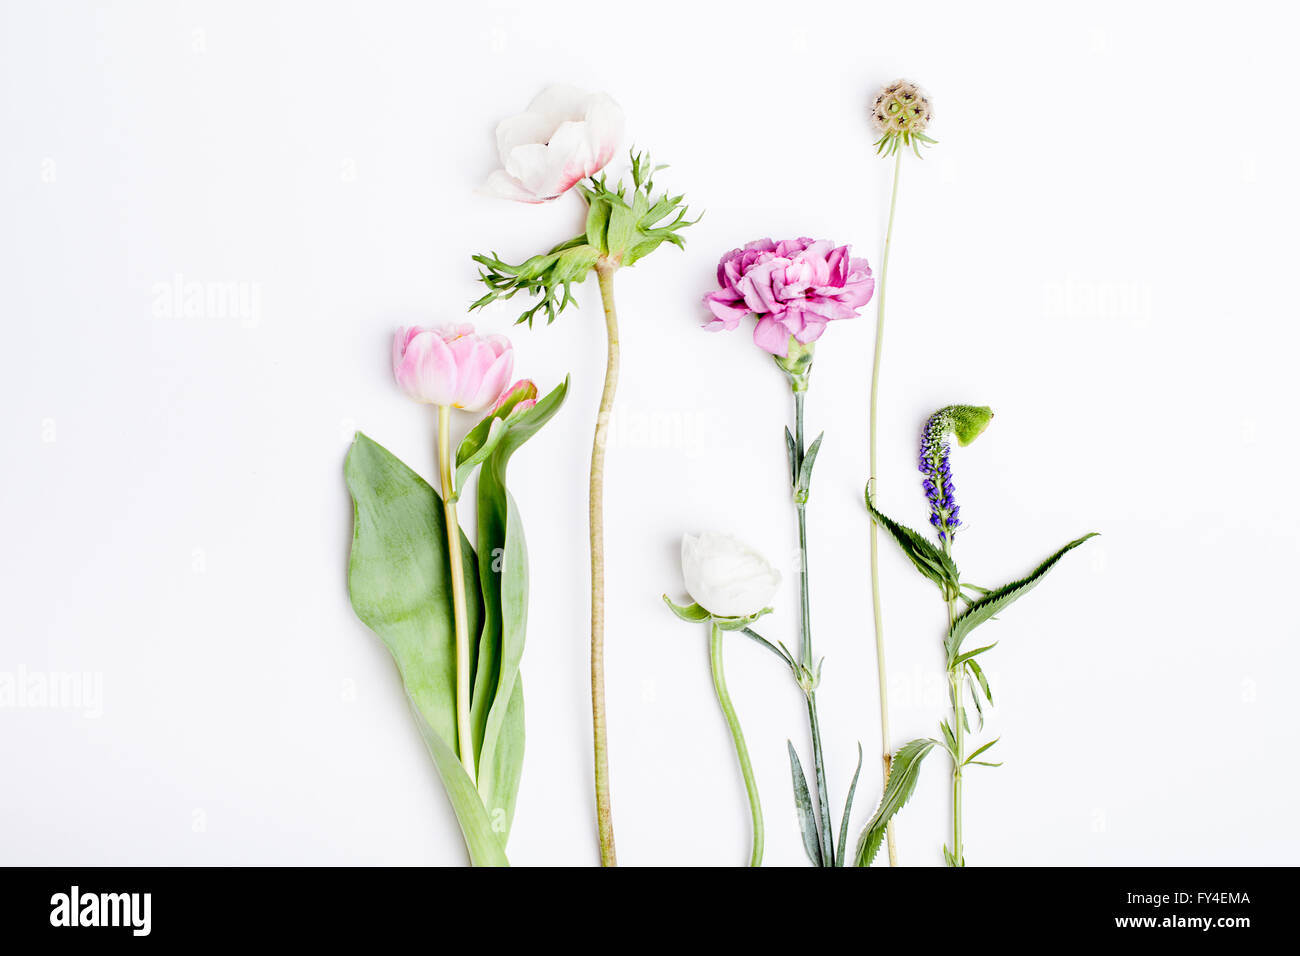 Pink tulip, white anemone, pink clove and white buttercup lying on white background from the top Stock Photo